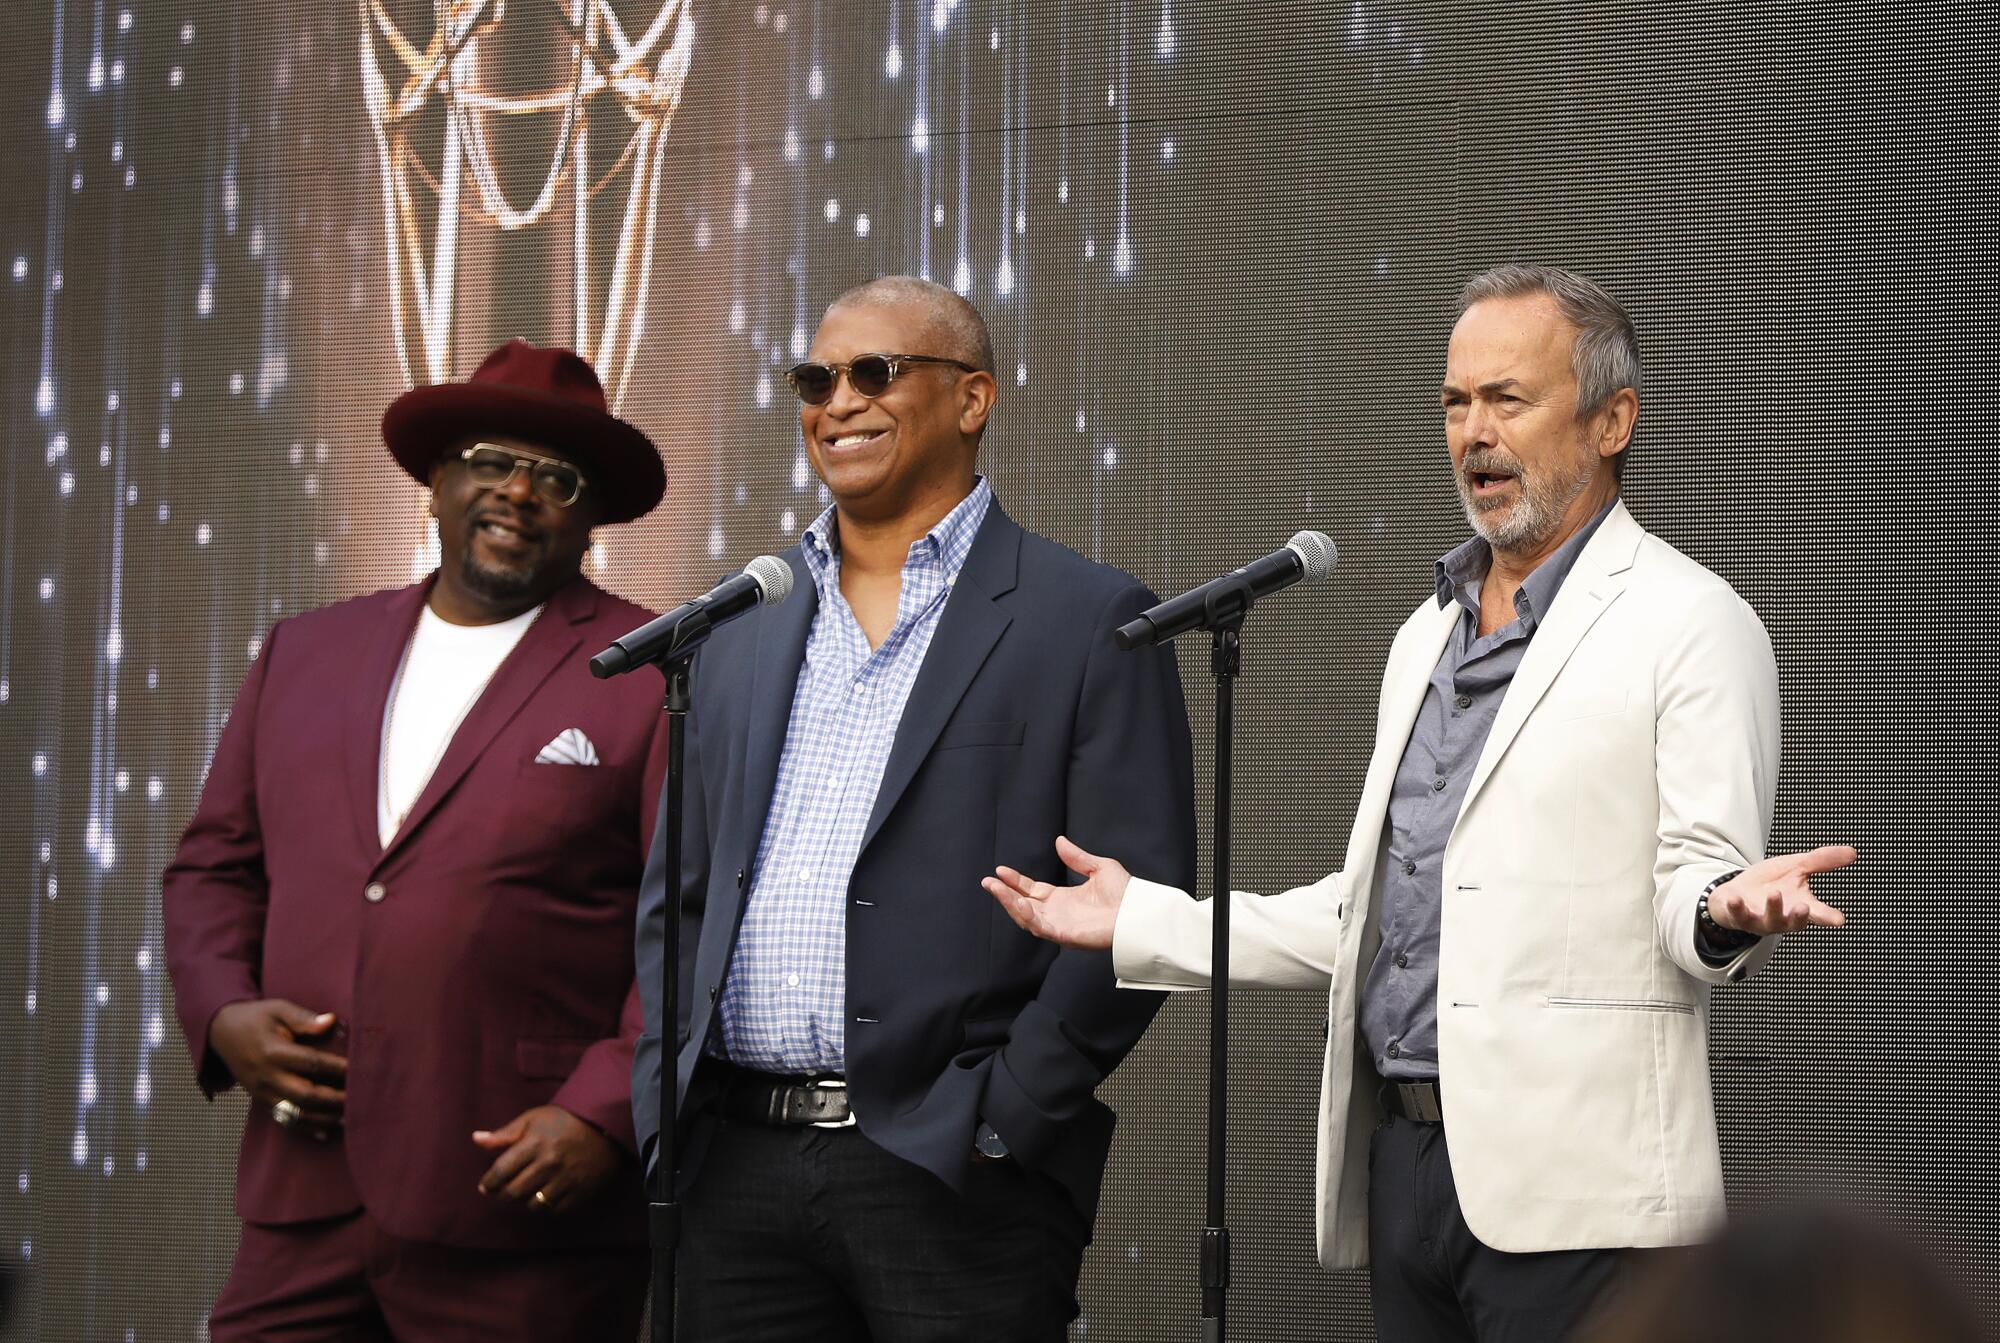 Host of the upcoming 73rd Emmy Awards Cedric the Entertainer, executive producers Reginald Hudlin and Ian Stewart.